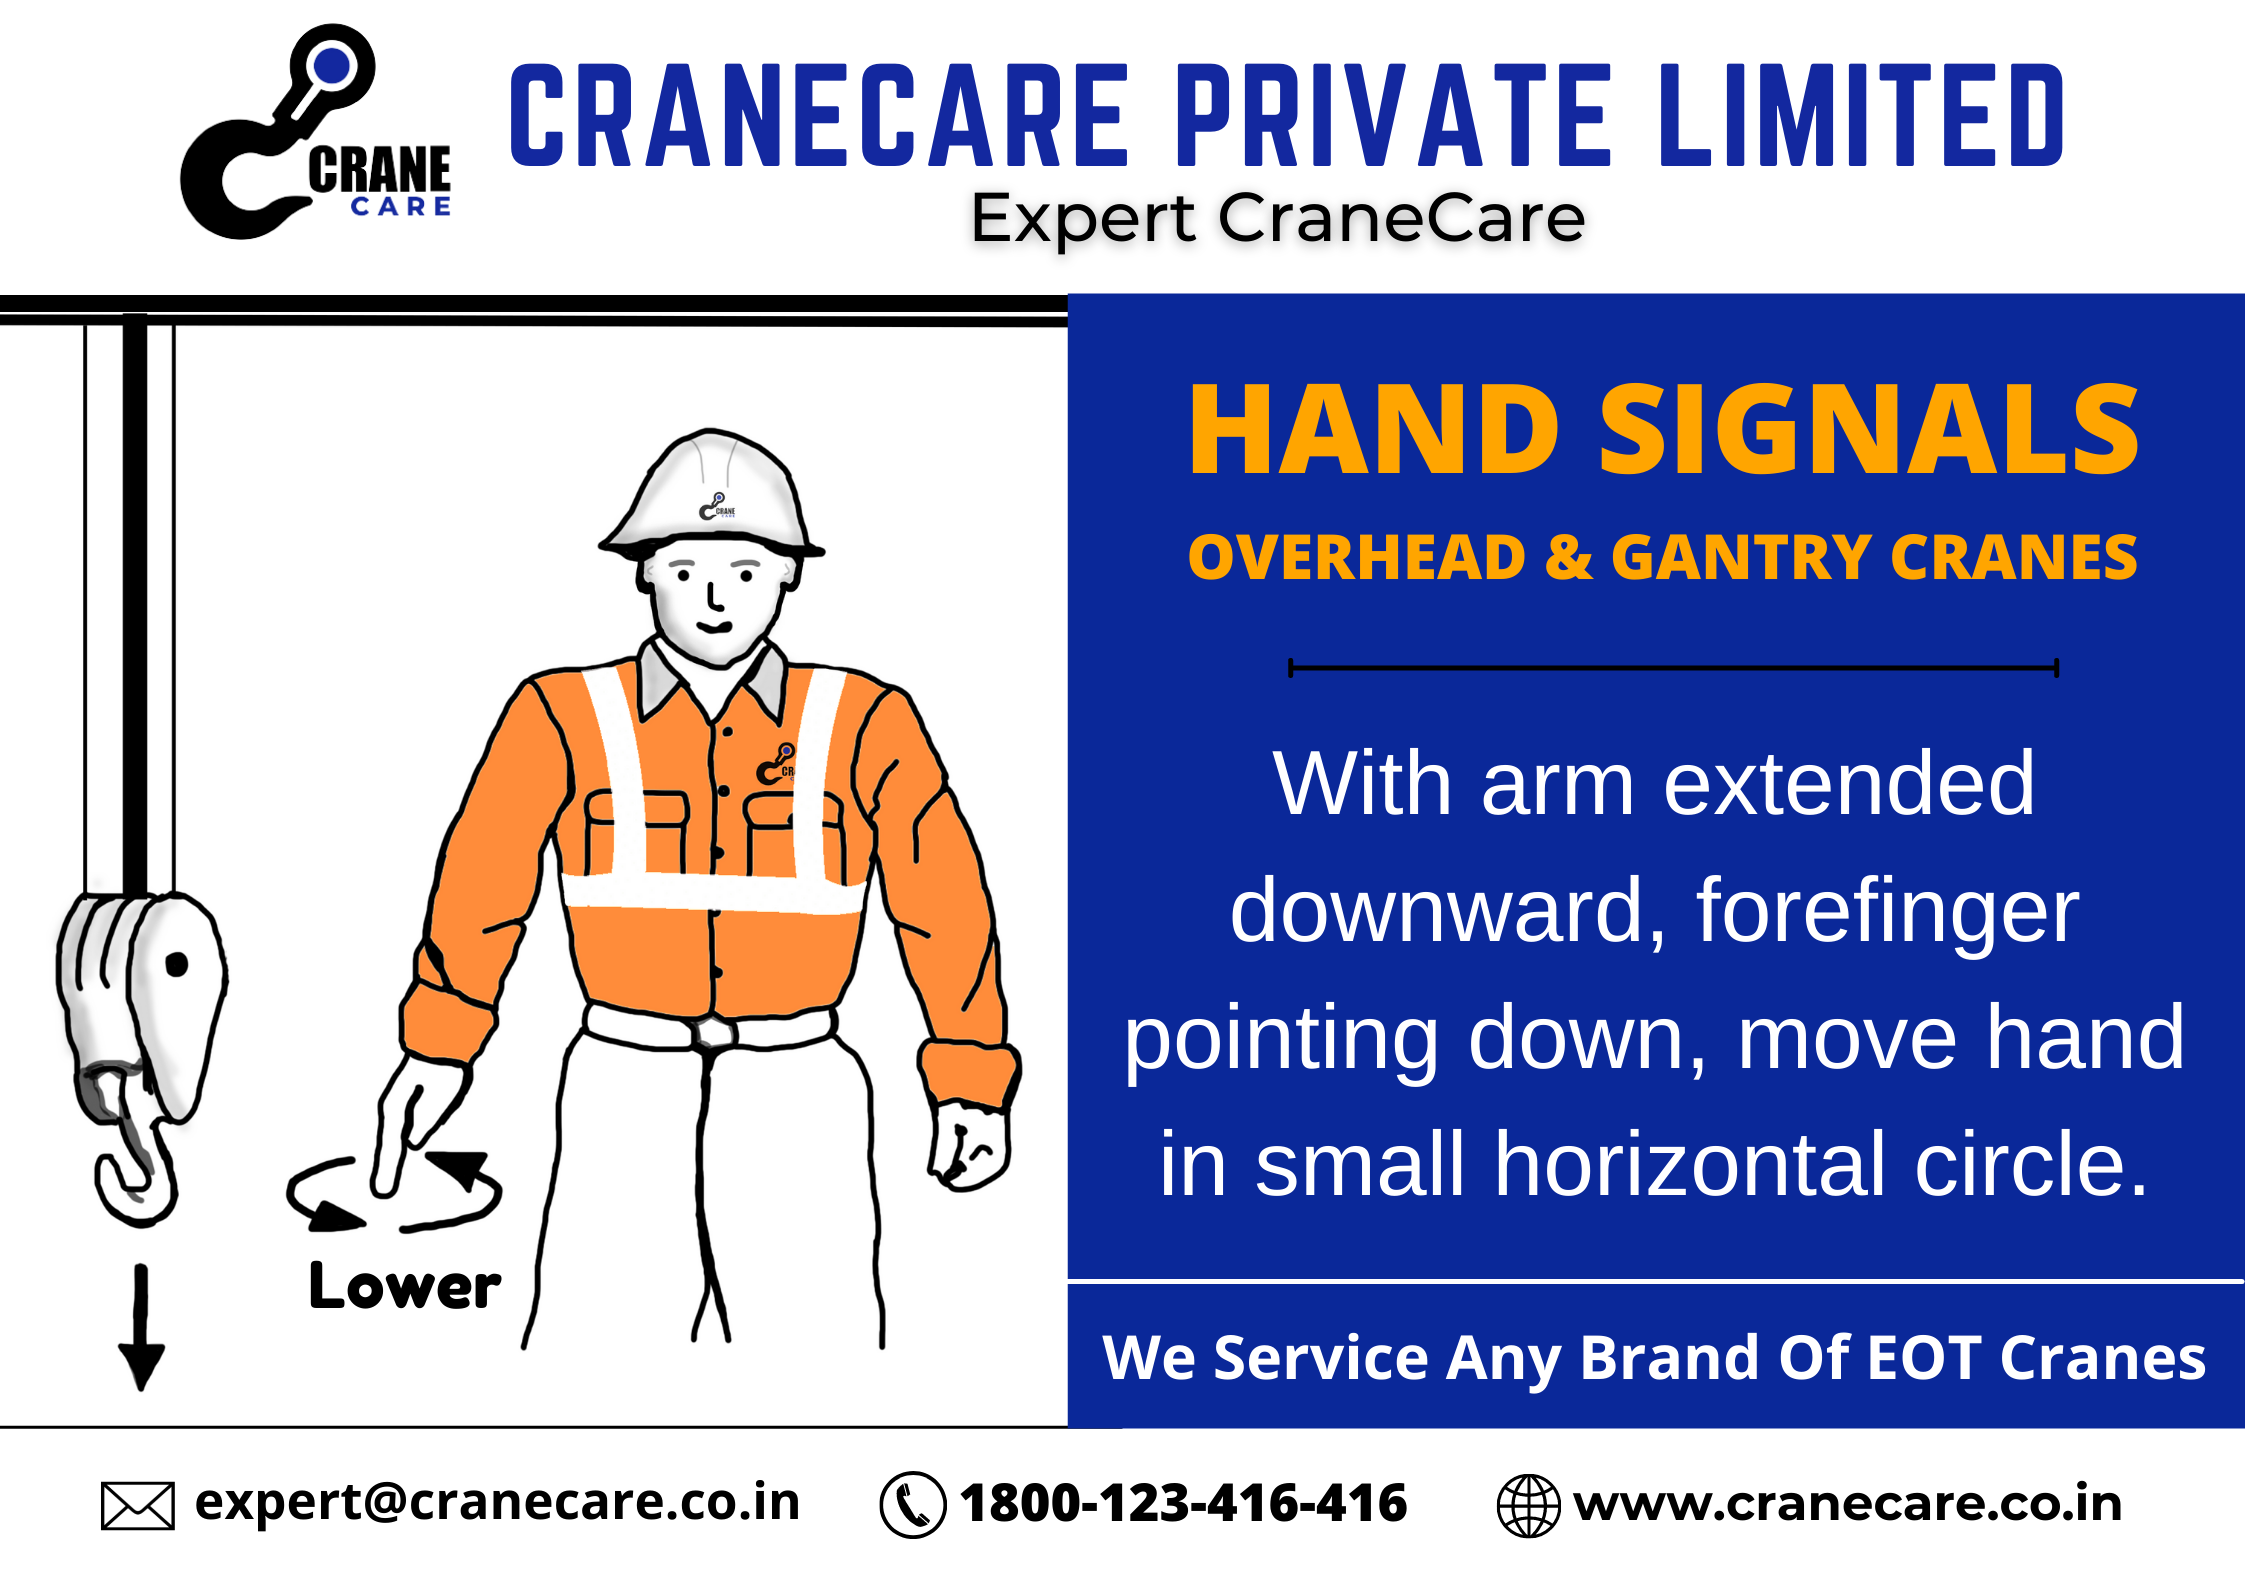 Lower : hand signal for EOT cranes